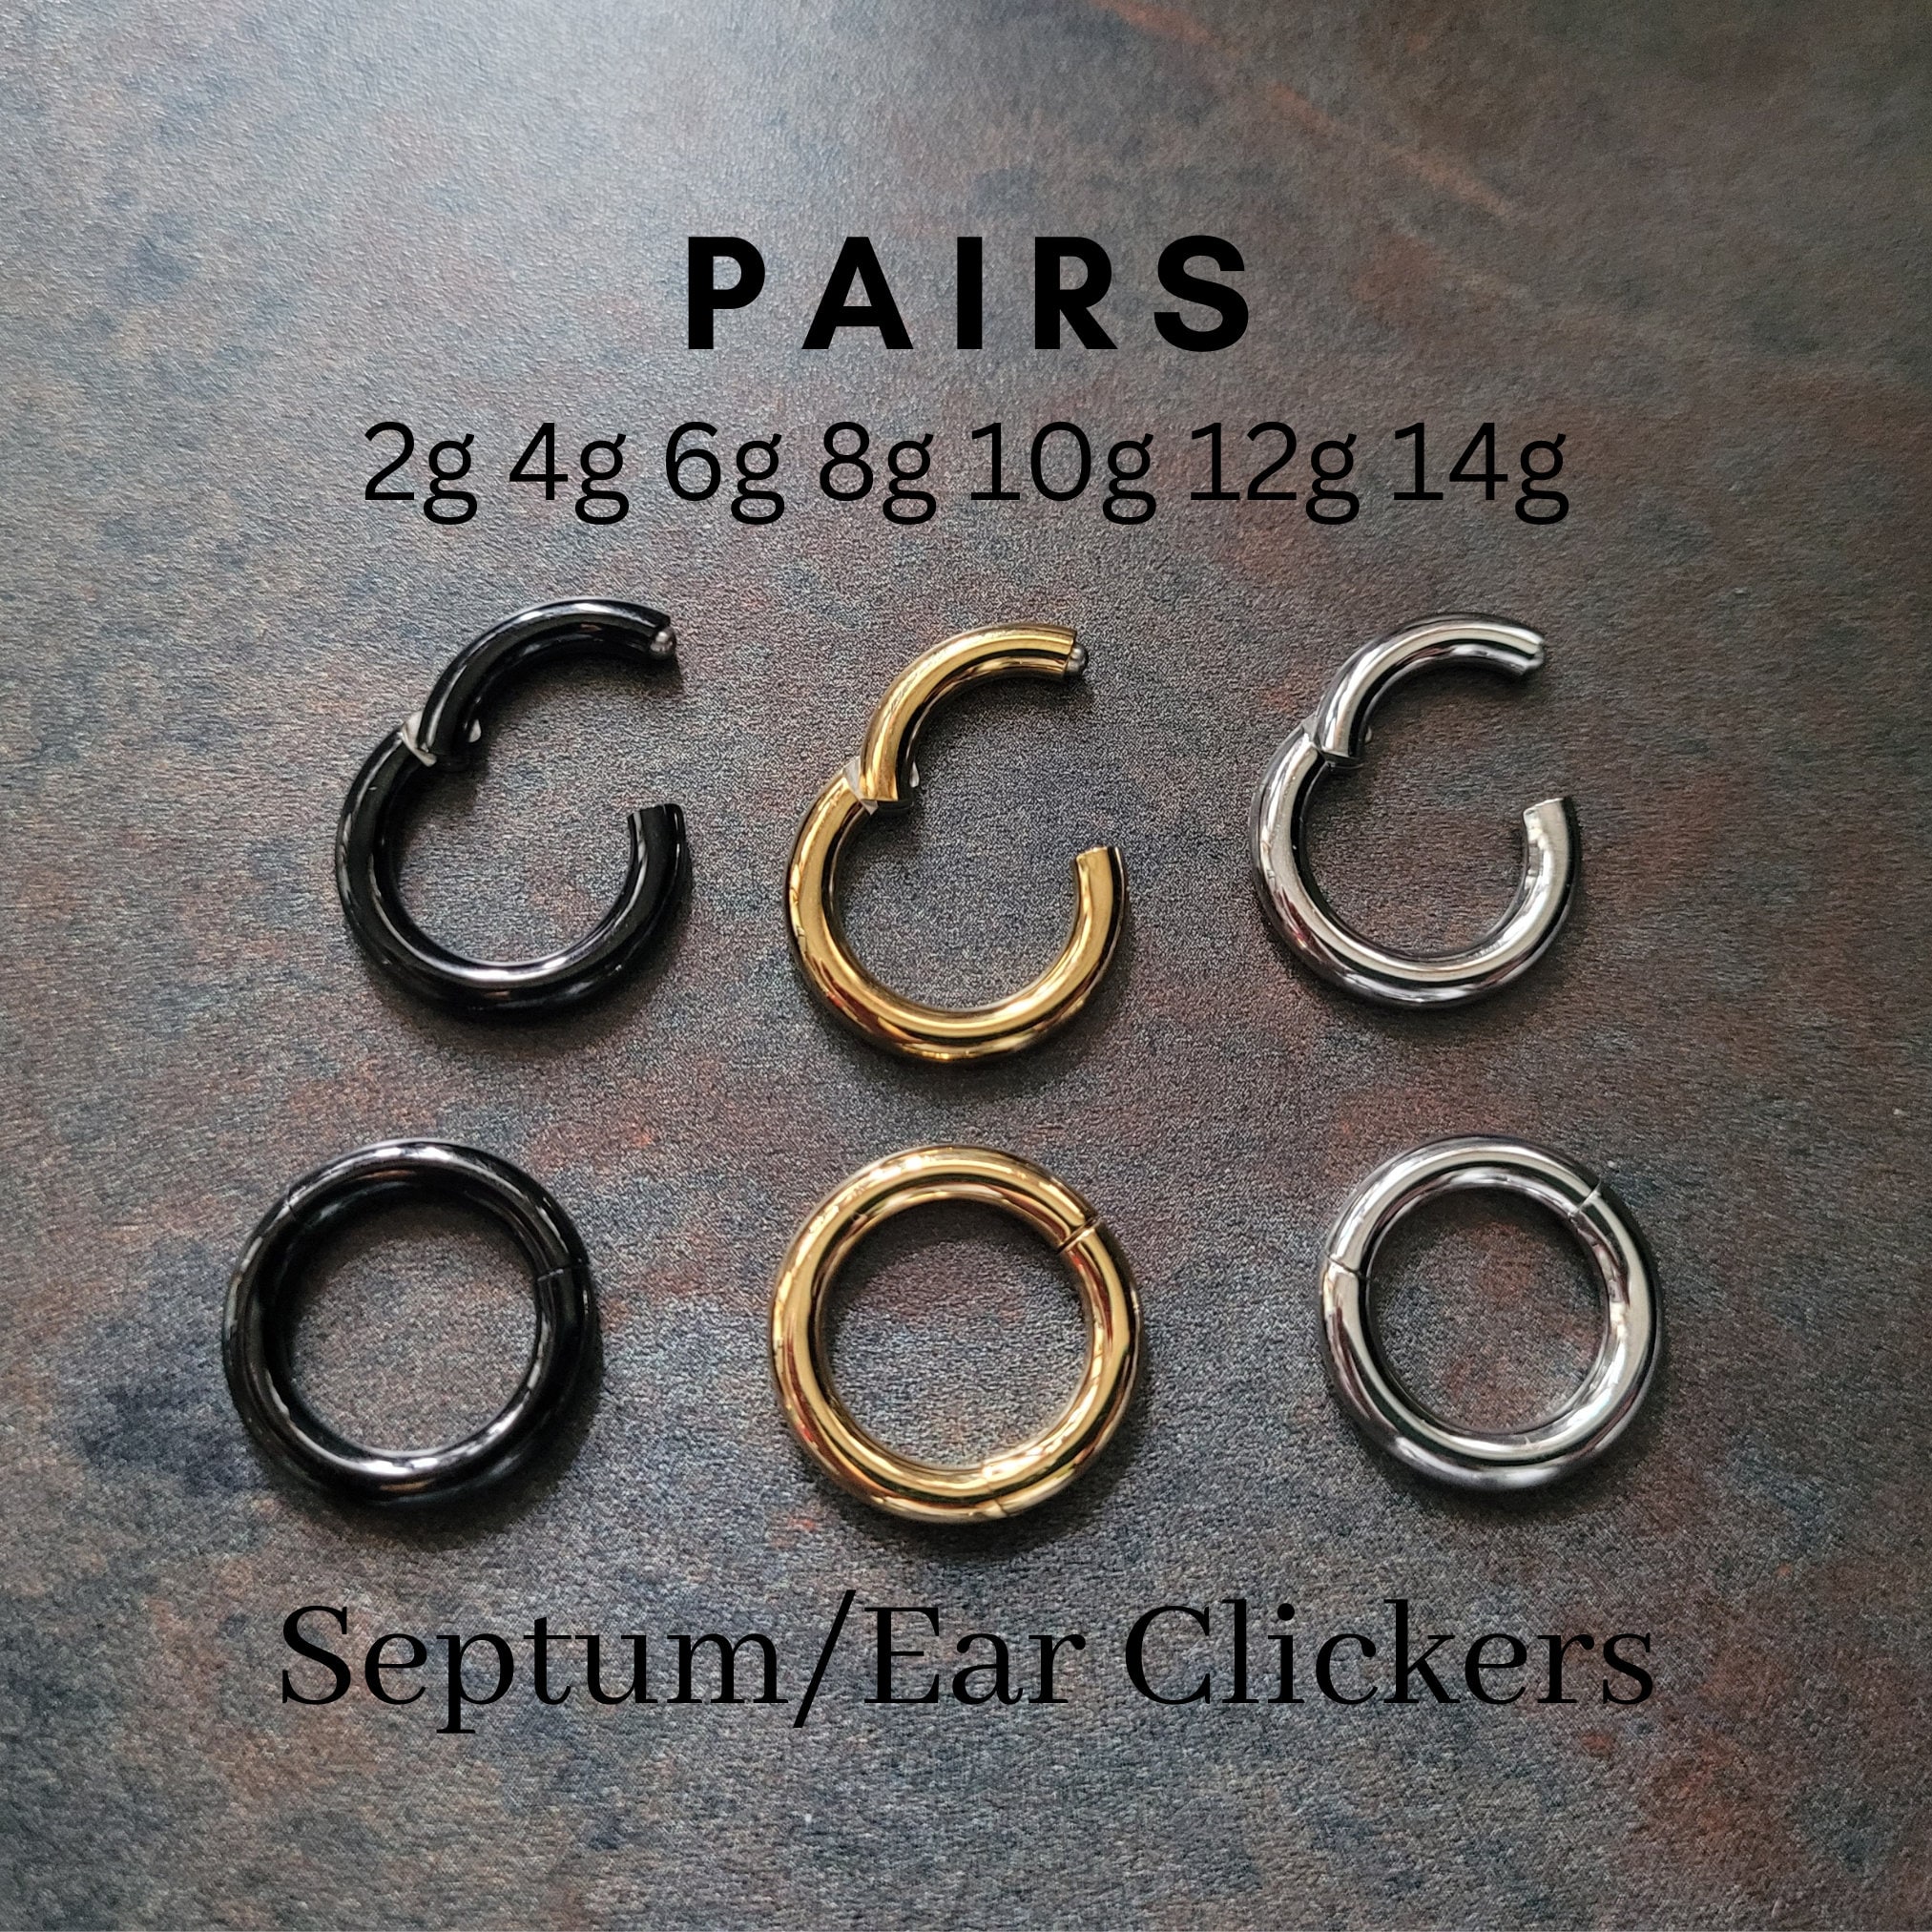 Magic Earring Back, Magic Earring Lifters Supports Lifts, Firmly